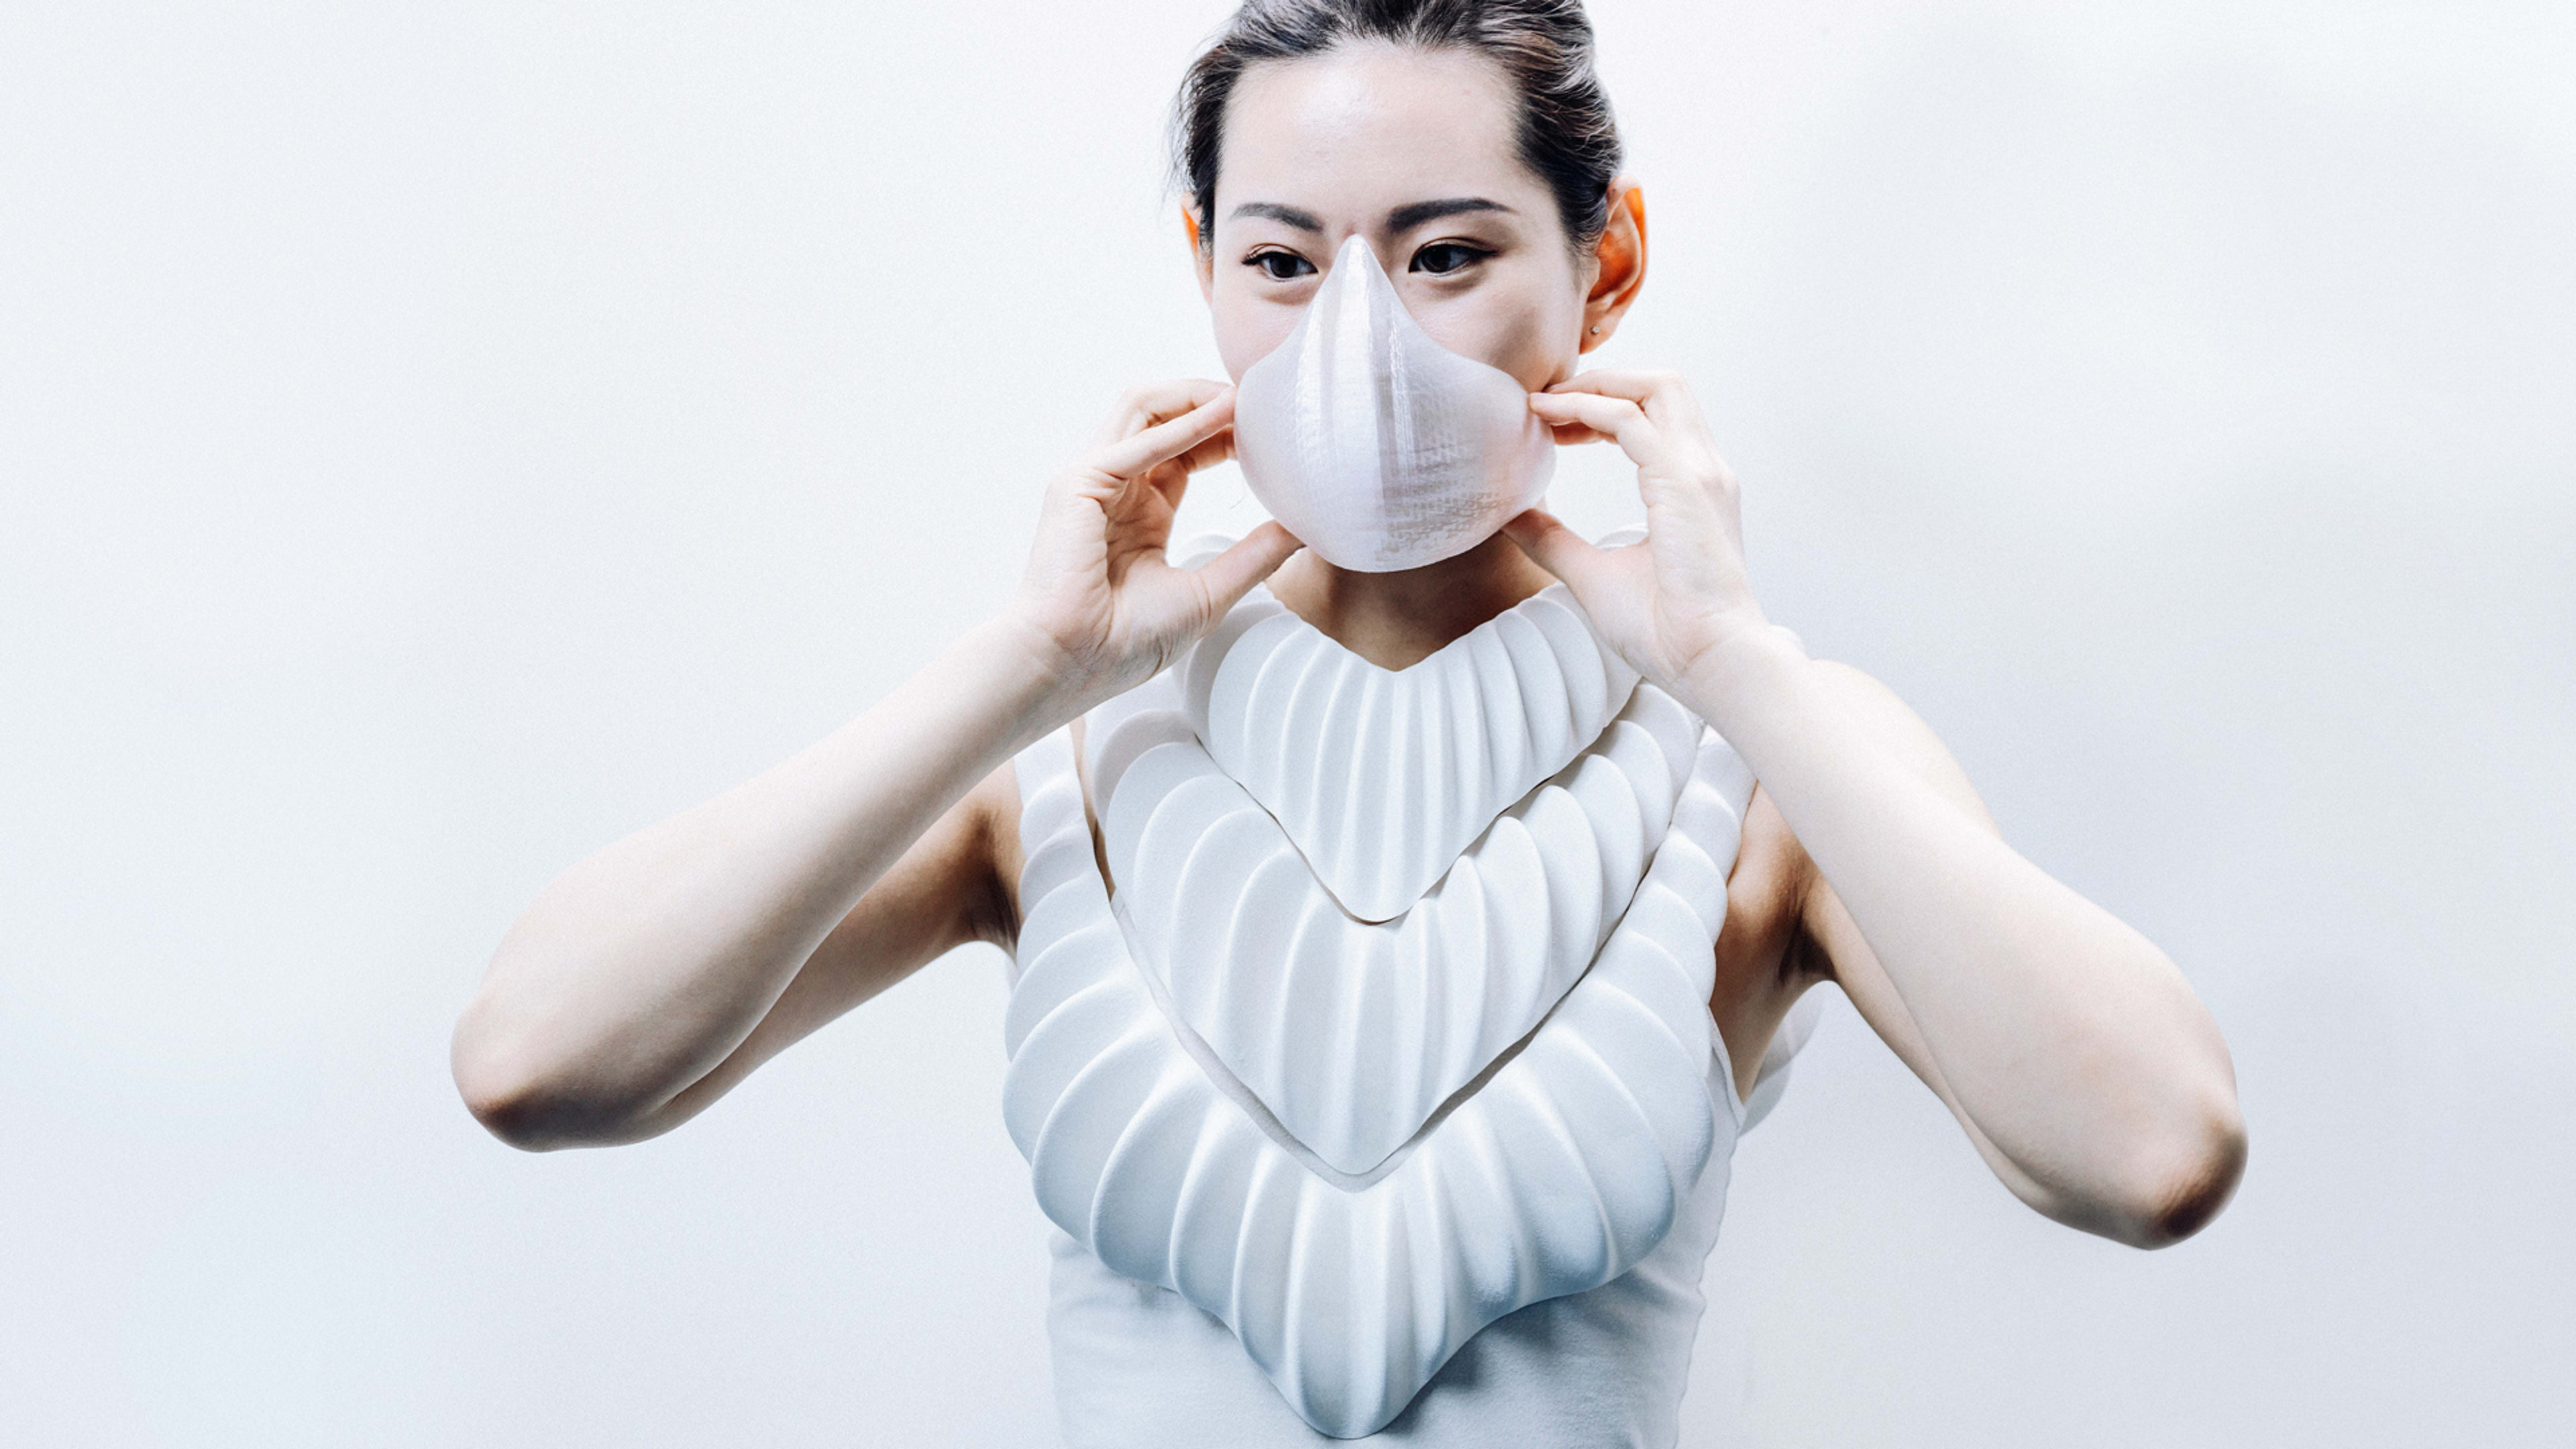 Amphibio is a 3D-printed shirt that lets you breathe underwater